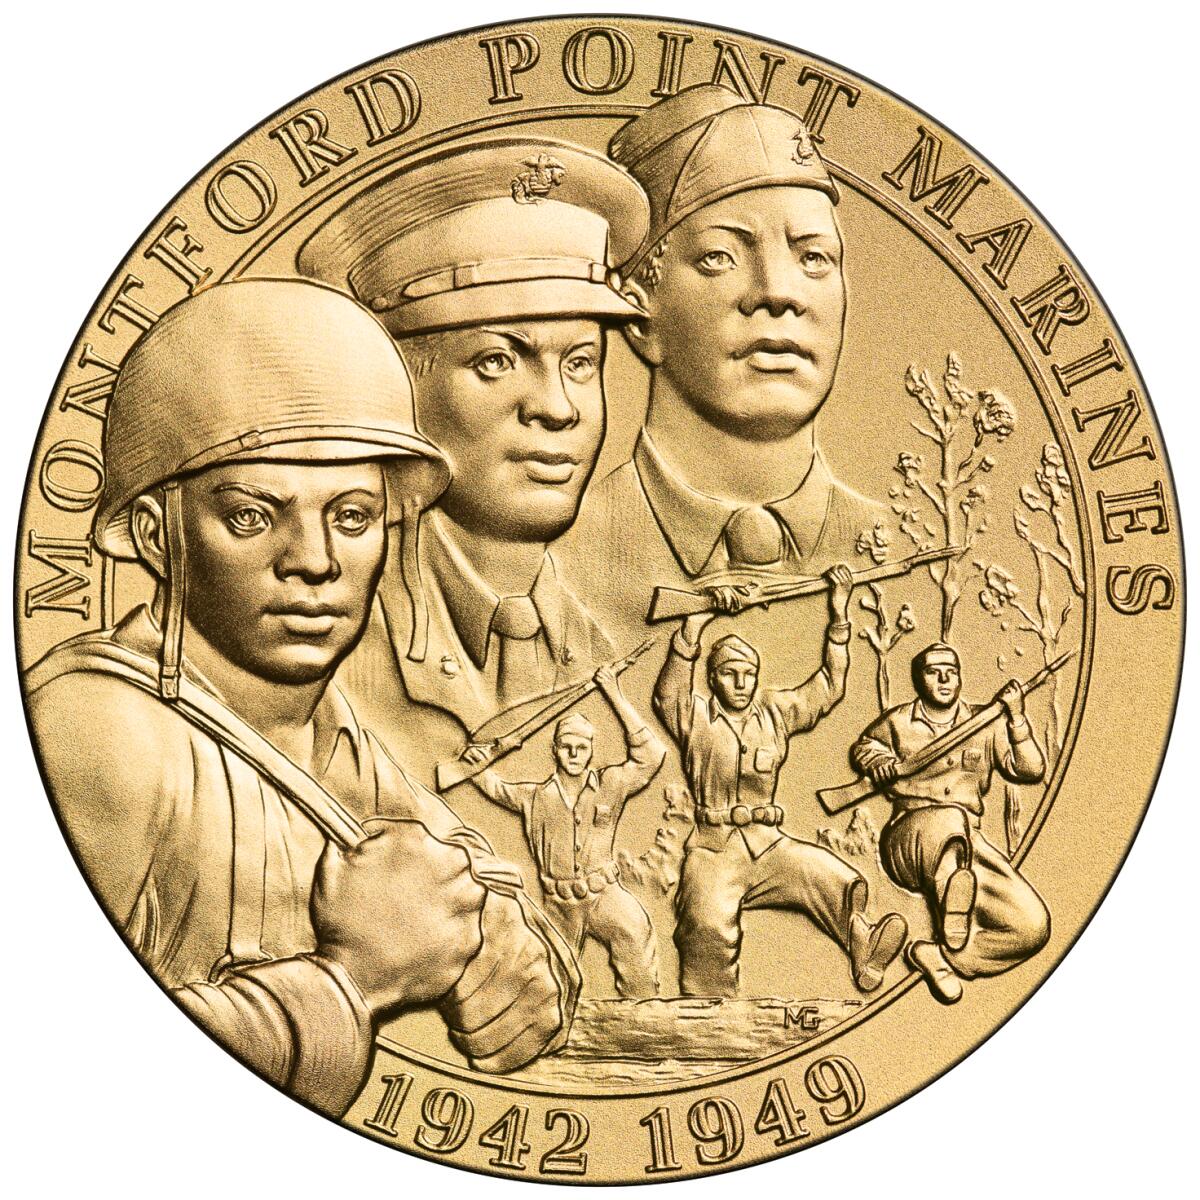 Congressional Gold Medal awarded to Montford Point Marines by Barack Obama on Nov. 23, 2011.